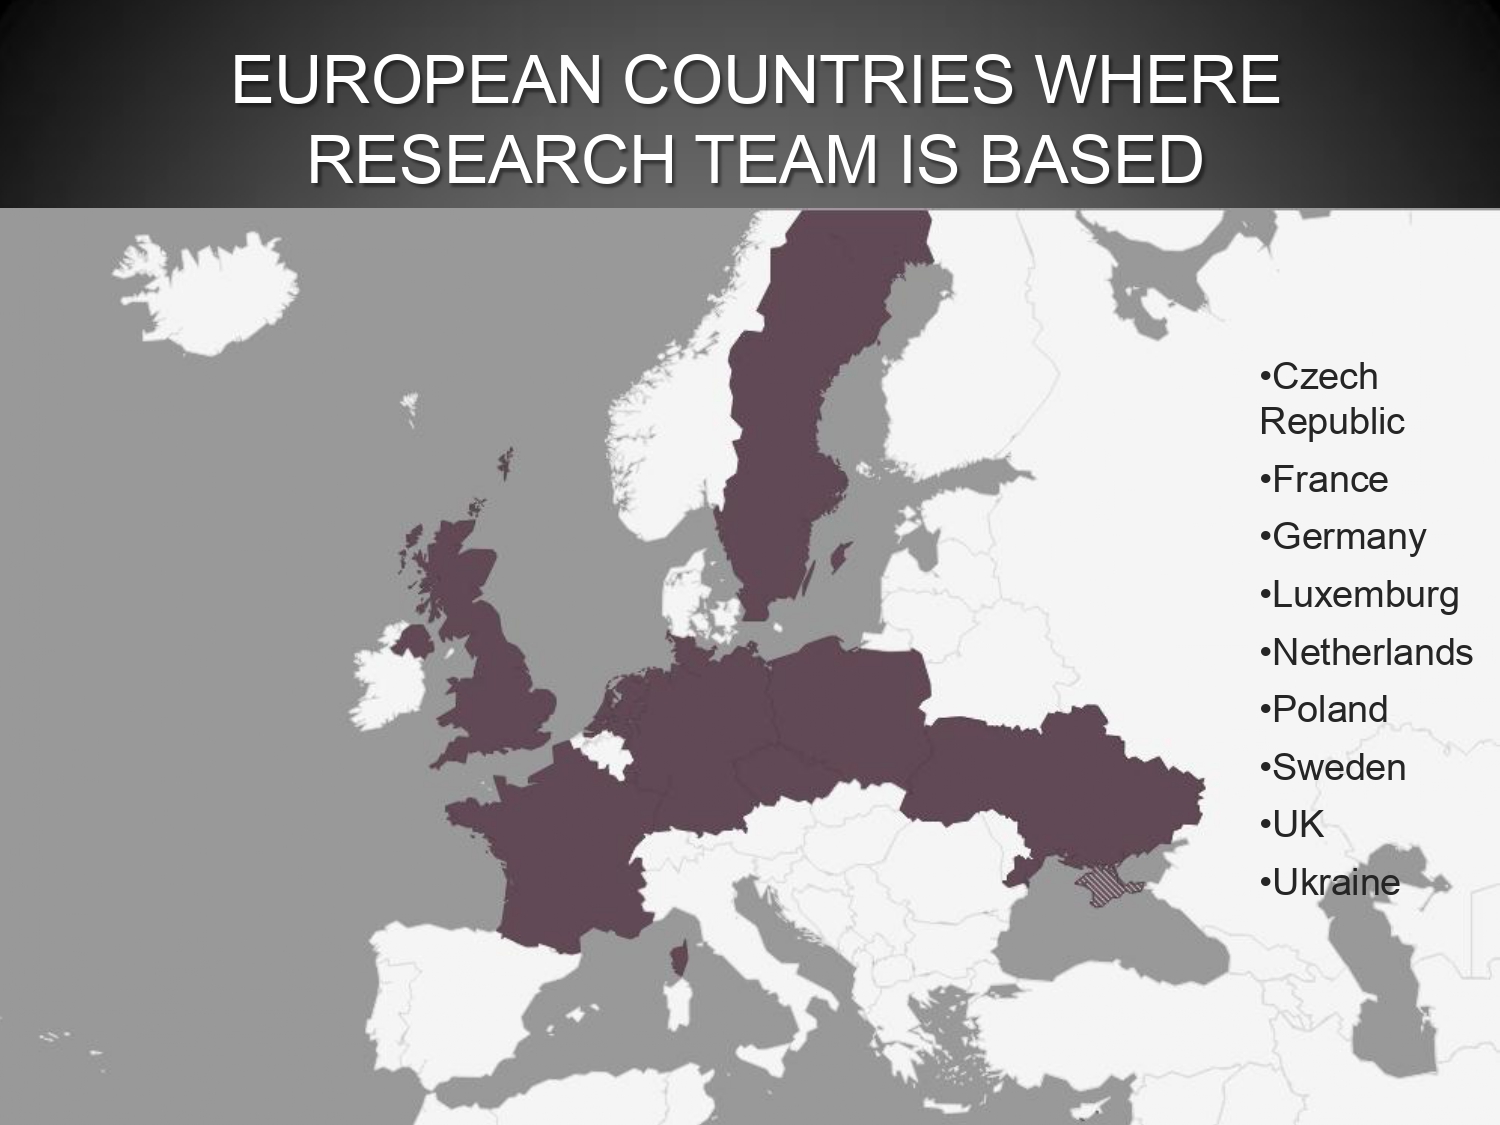 European countries where research team is based